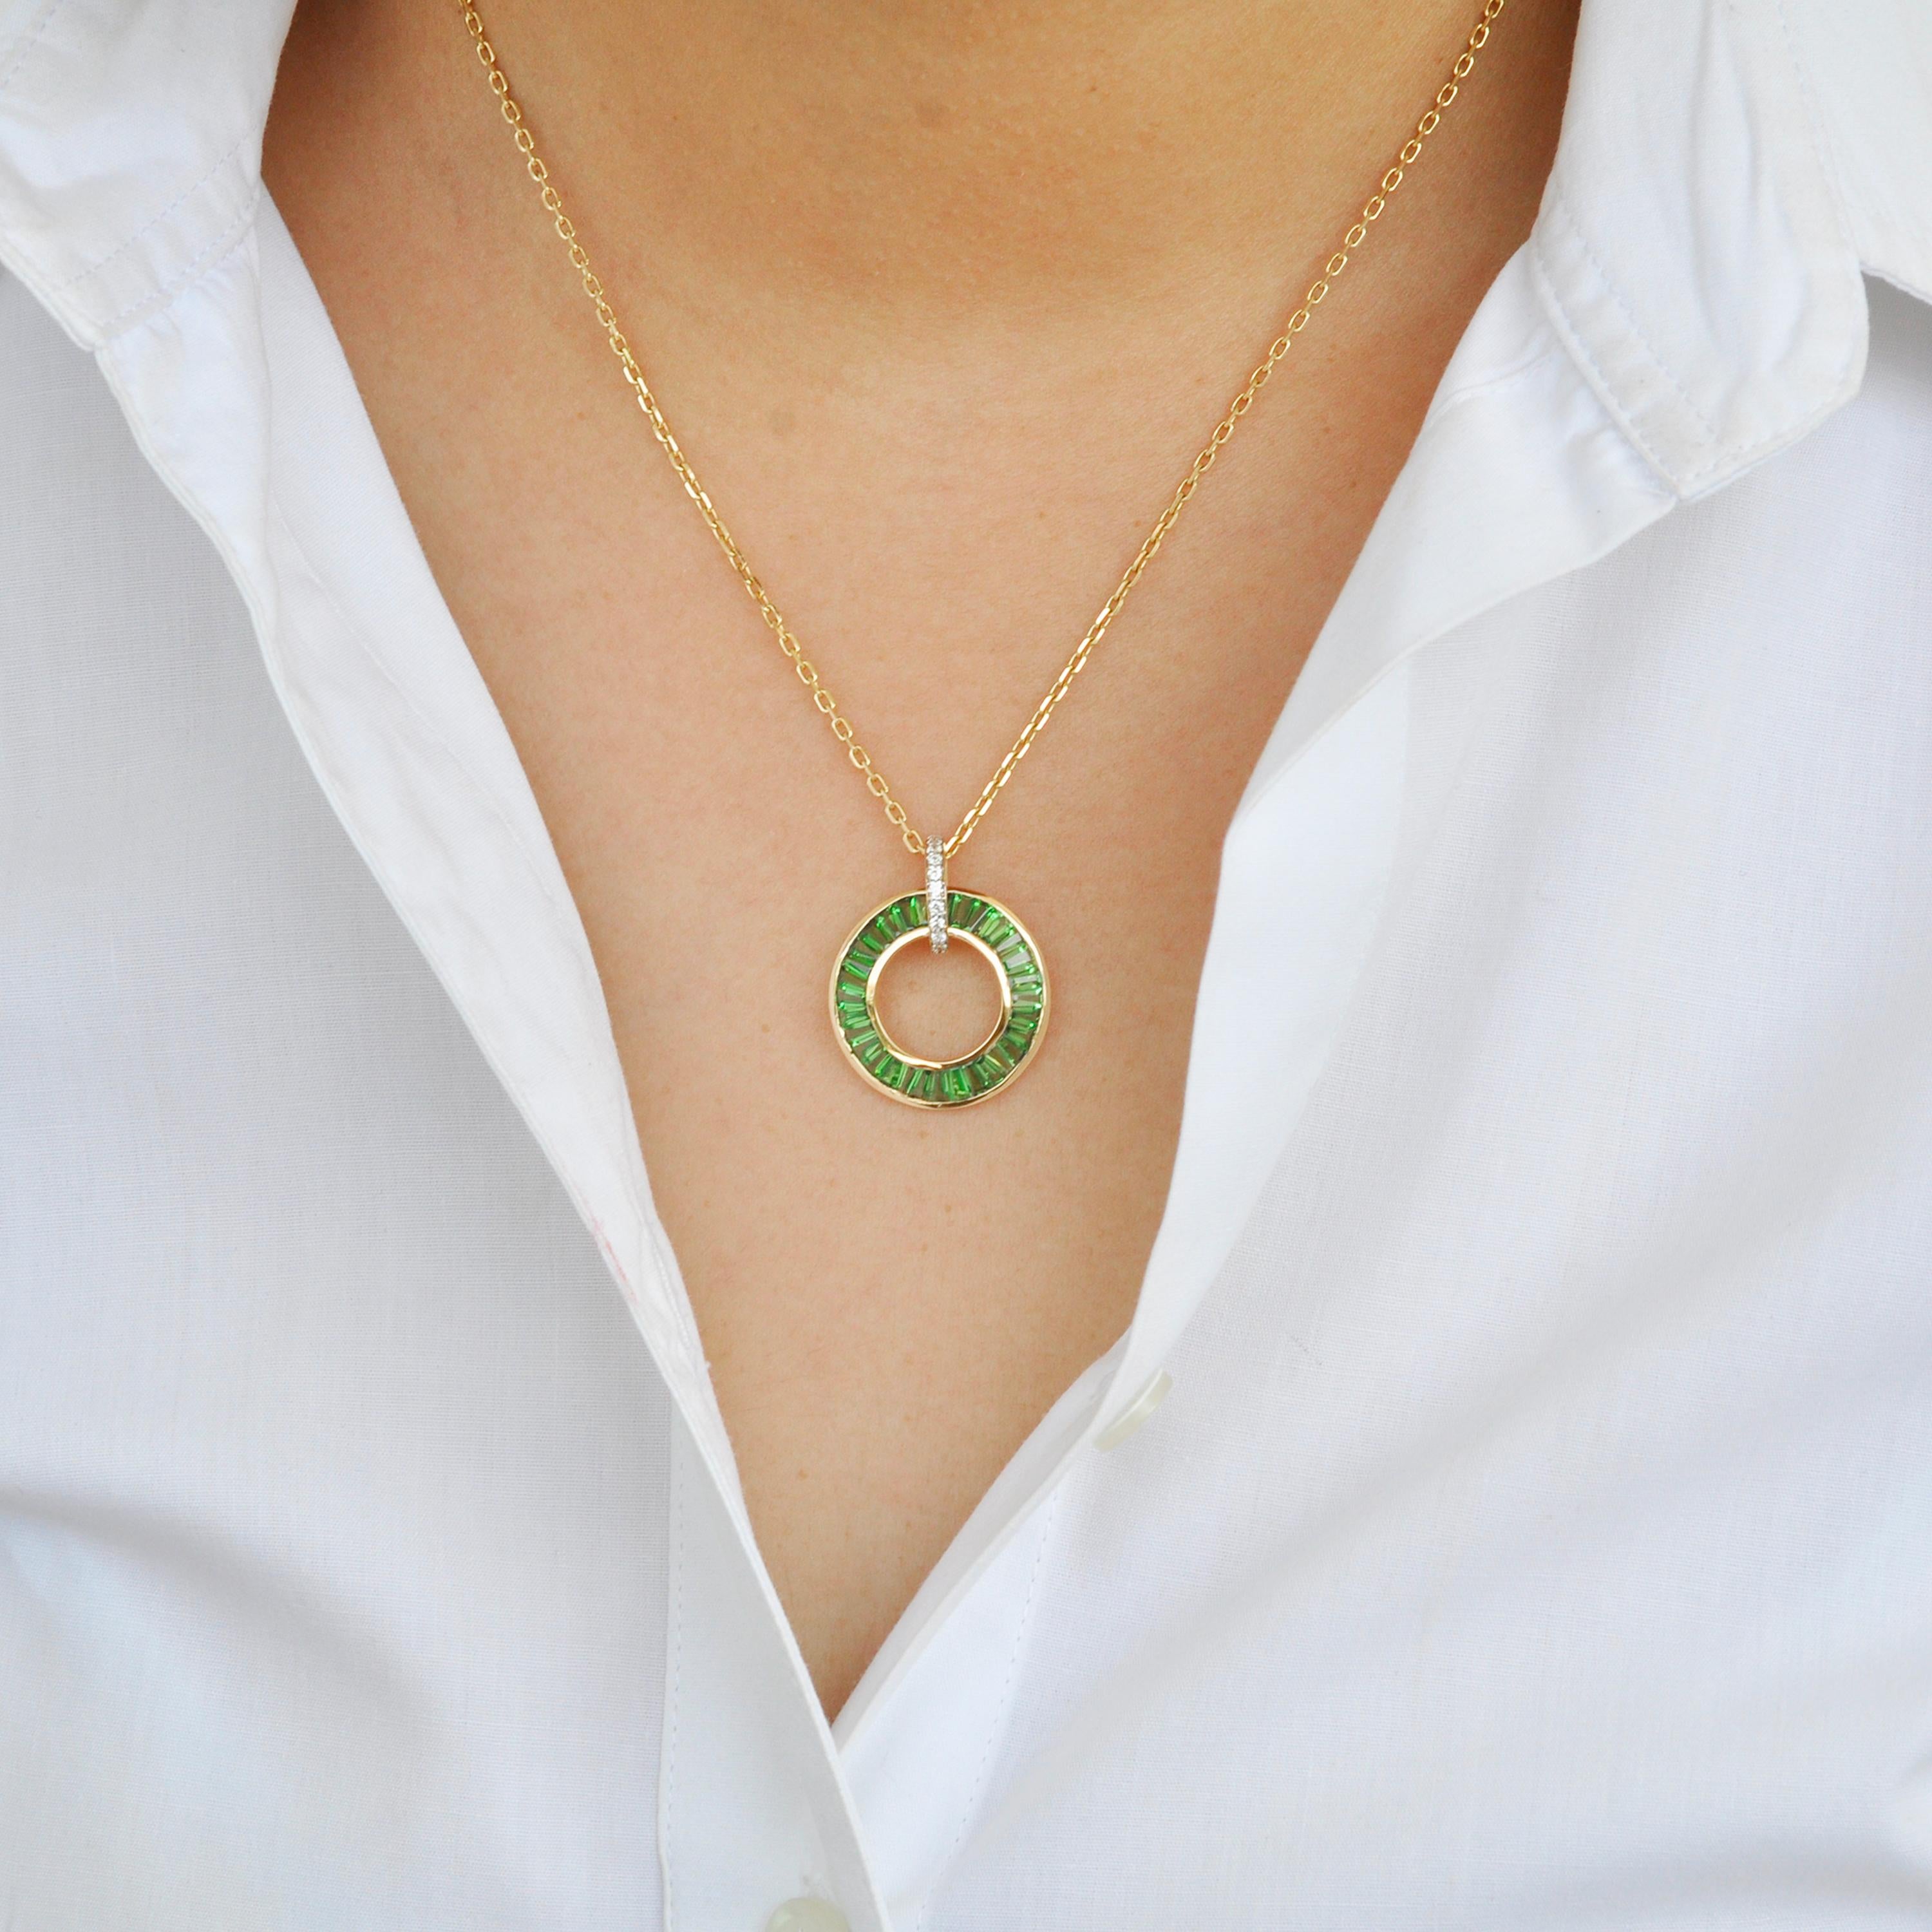 Indulge in the timeless allure of this Art Deco-inspired pendant, crafted in exquisite 18 Karat gold. Designed to captivate and enchant, this circular pendant features a stunning arrangement of Tsavorite garnet baguettes, expertly channel set to